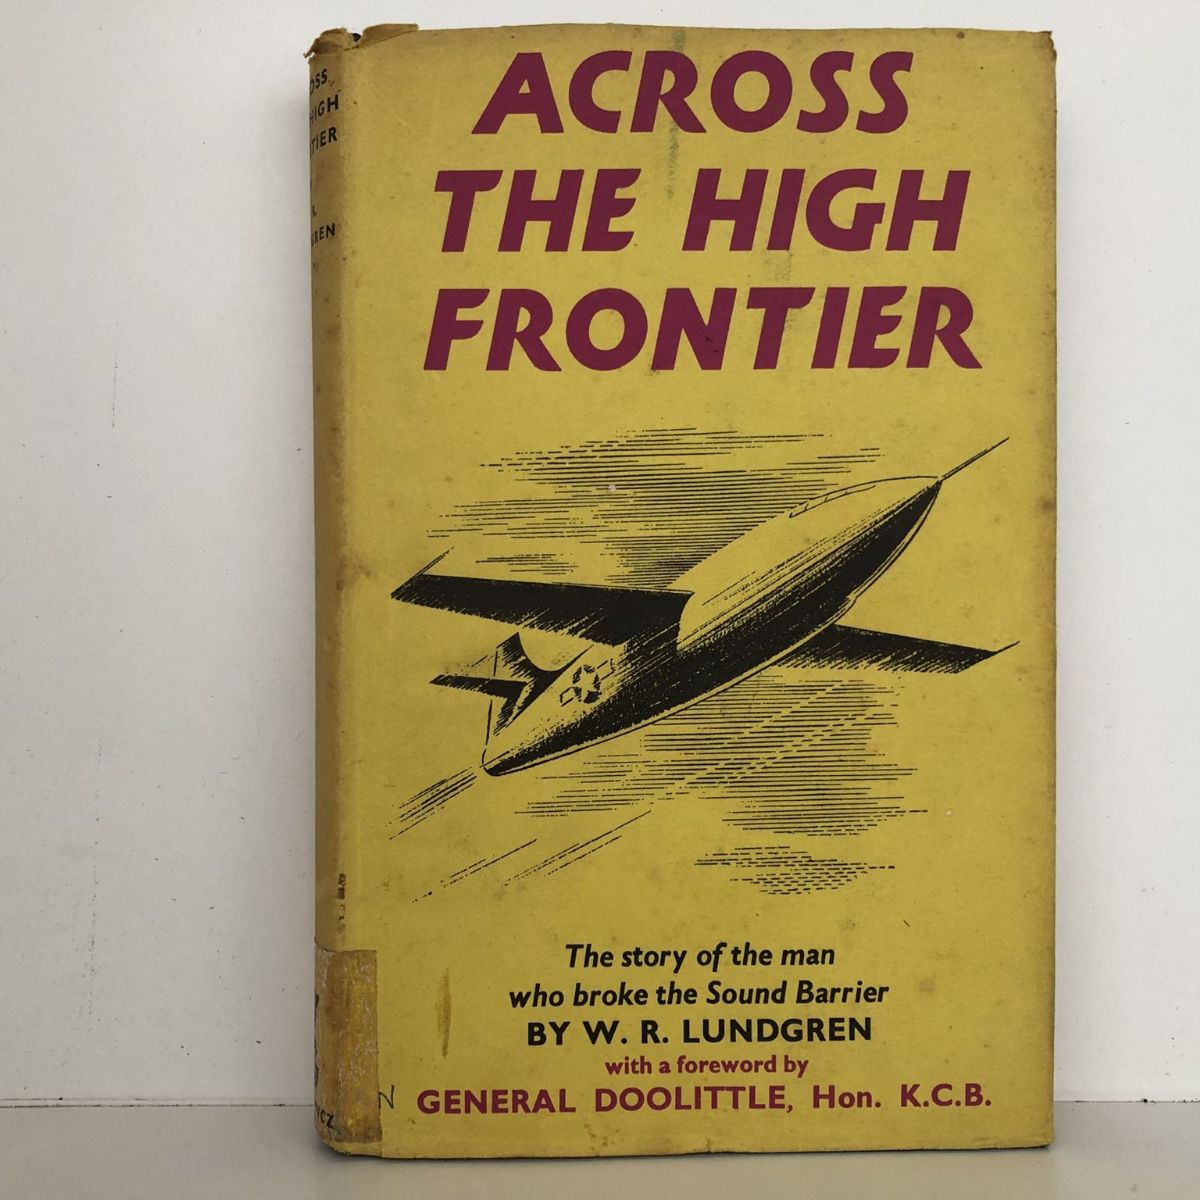 ACROSS THE HIGH FRONTIER: The Story of the man who broke the Sound Barrier